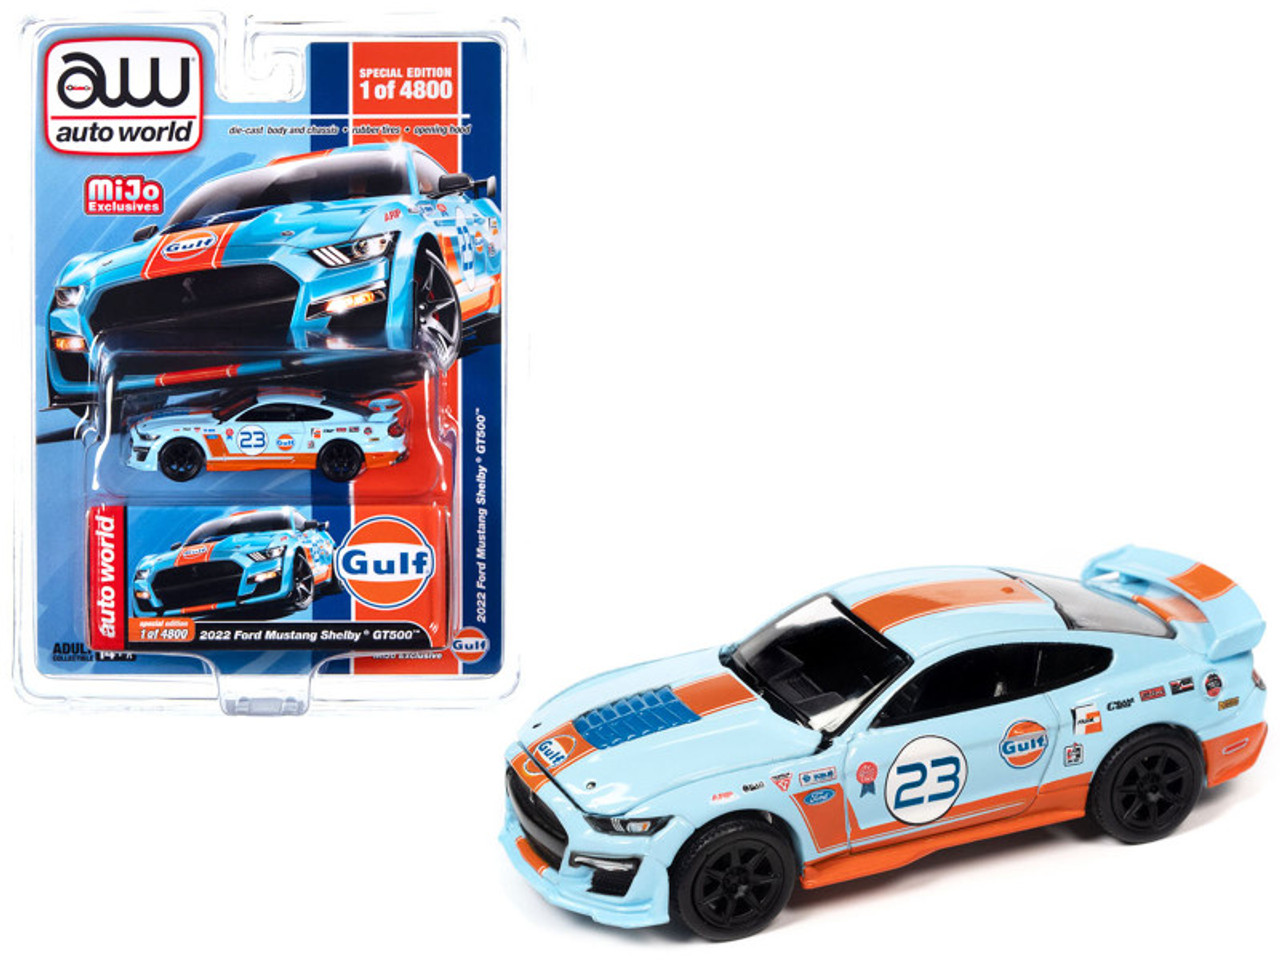 2022 Ford Mustang Shelby GT500 #23 Light Blue with Orange Stripes Gulf Oil Limited Edition to 4800 Pieces Worldwide 1/64 Diecast Model Car by Auto